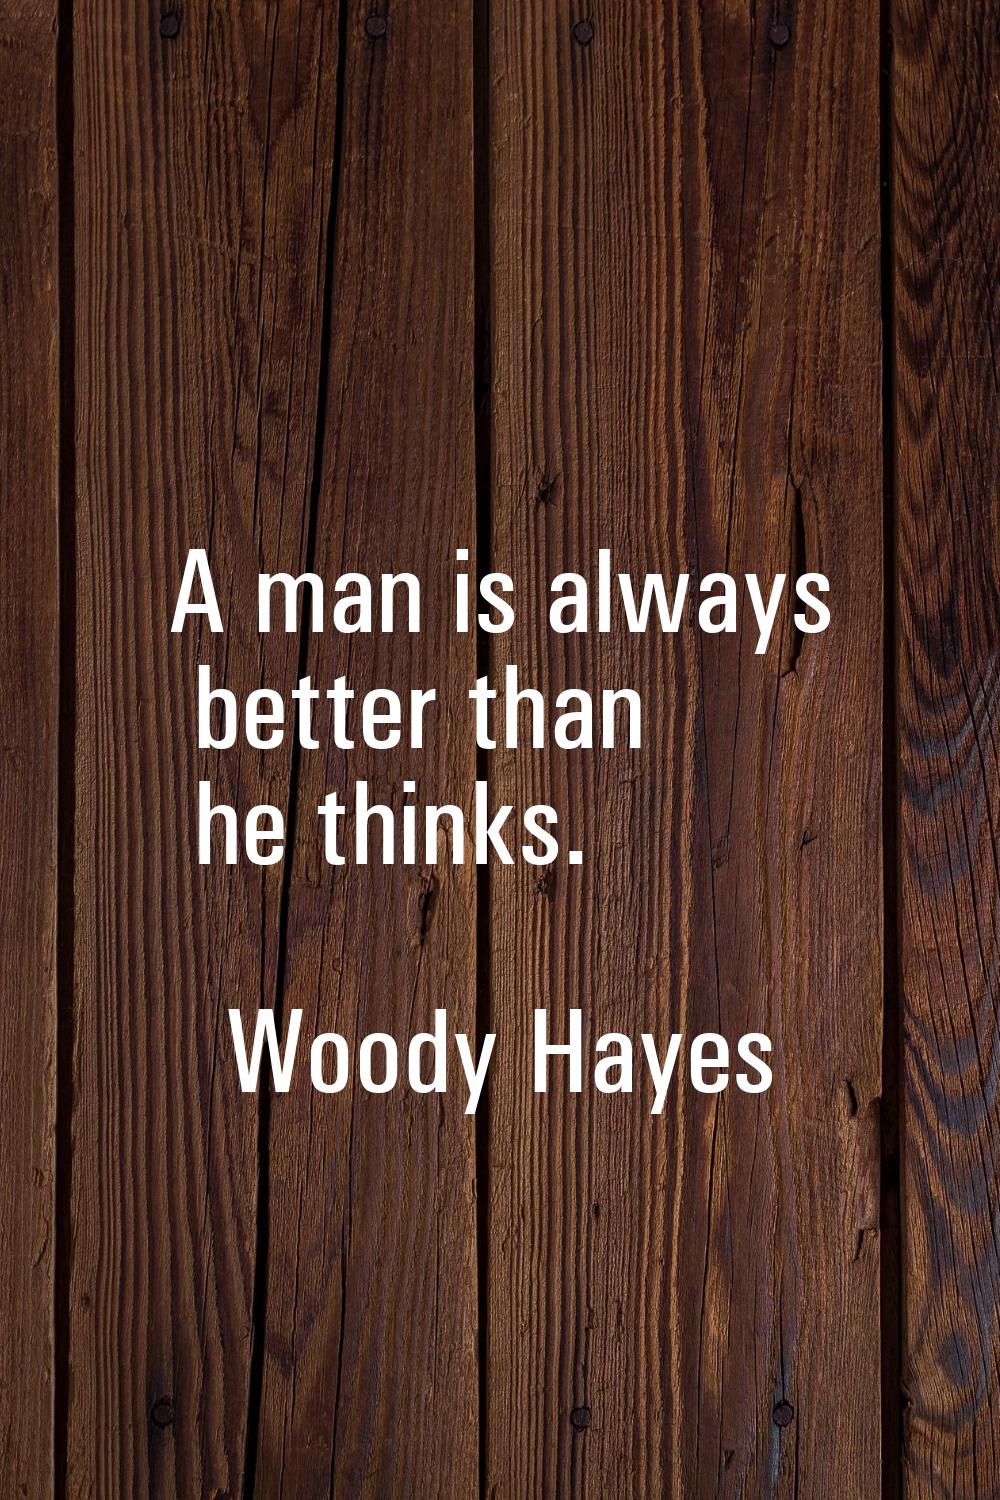 A man is always better than he thinks.